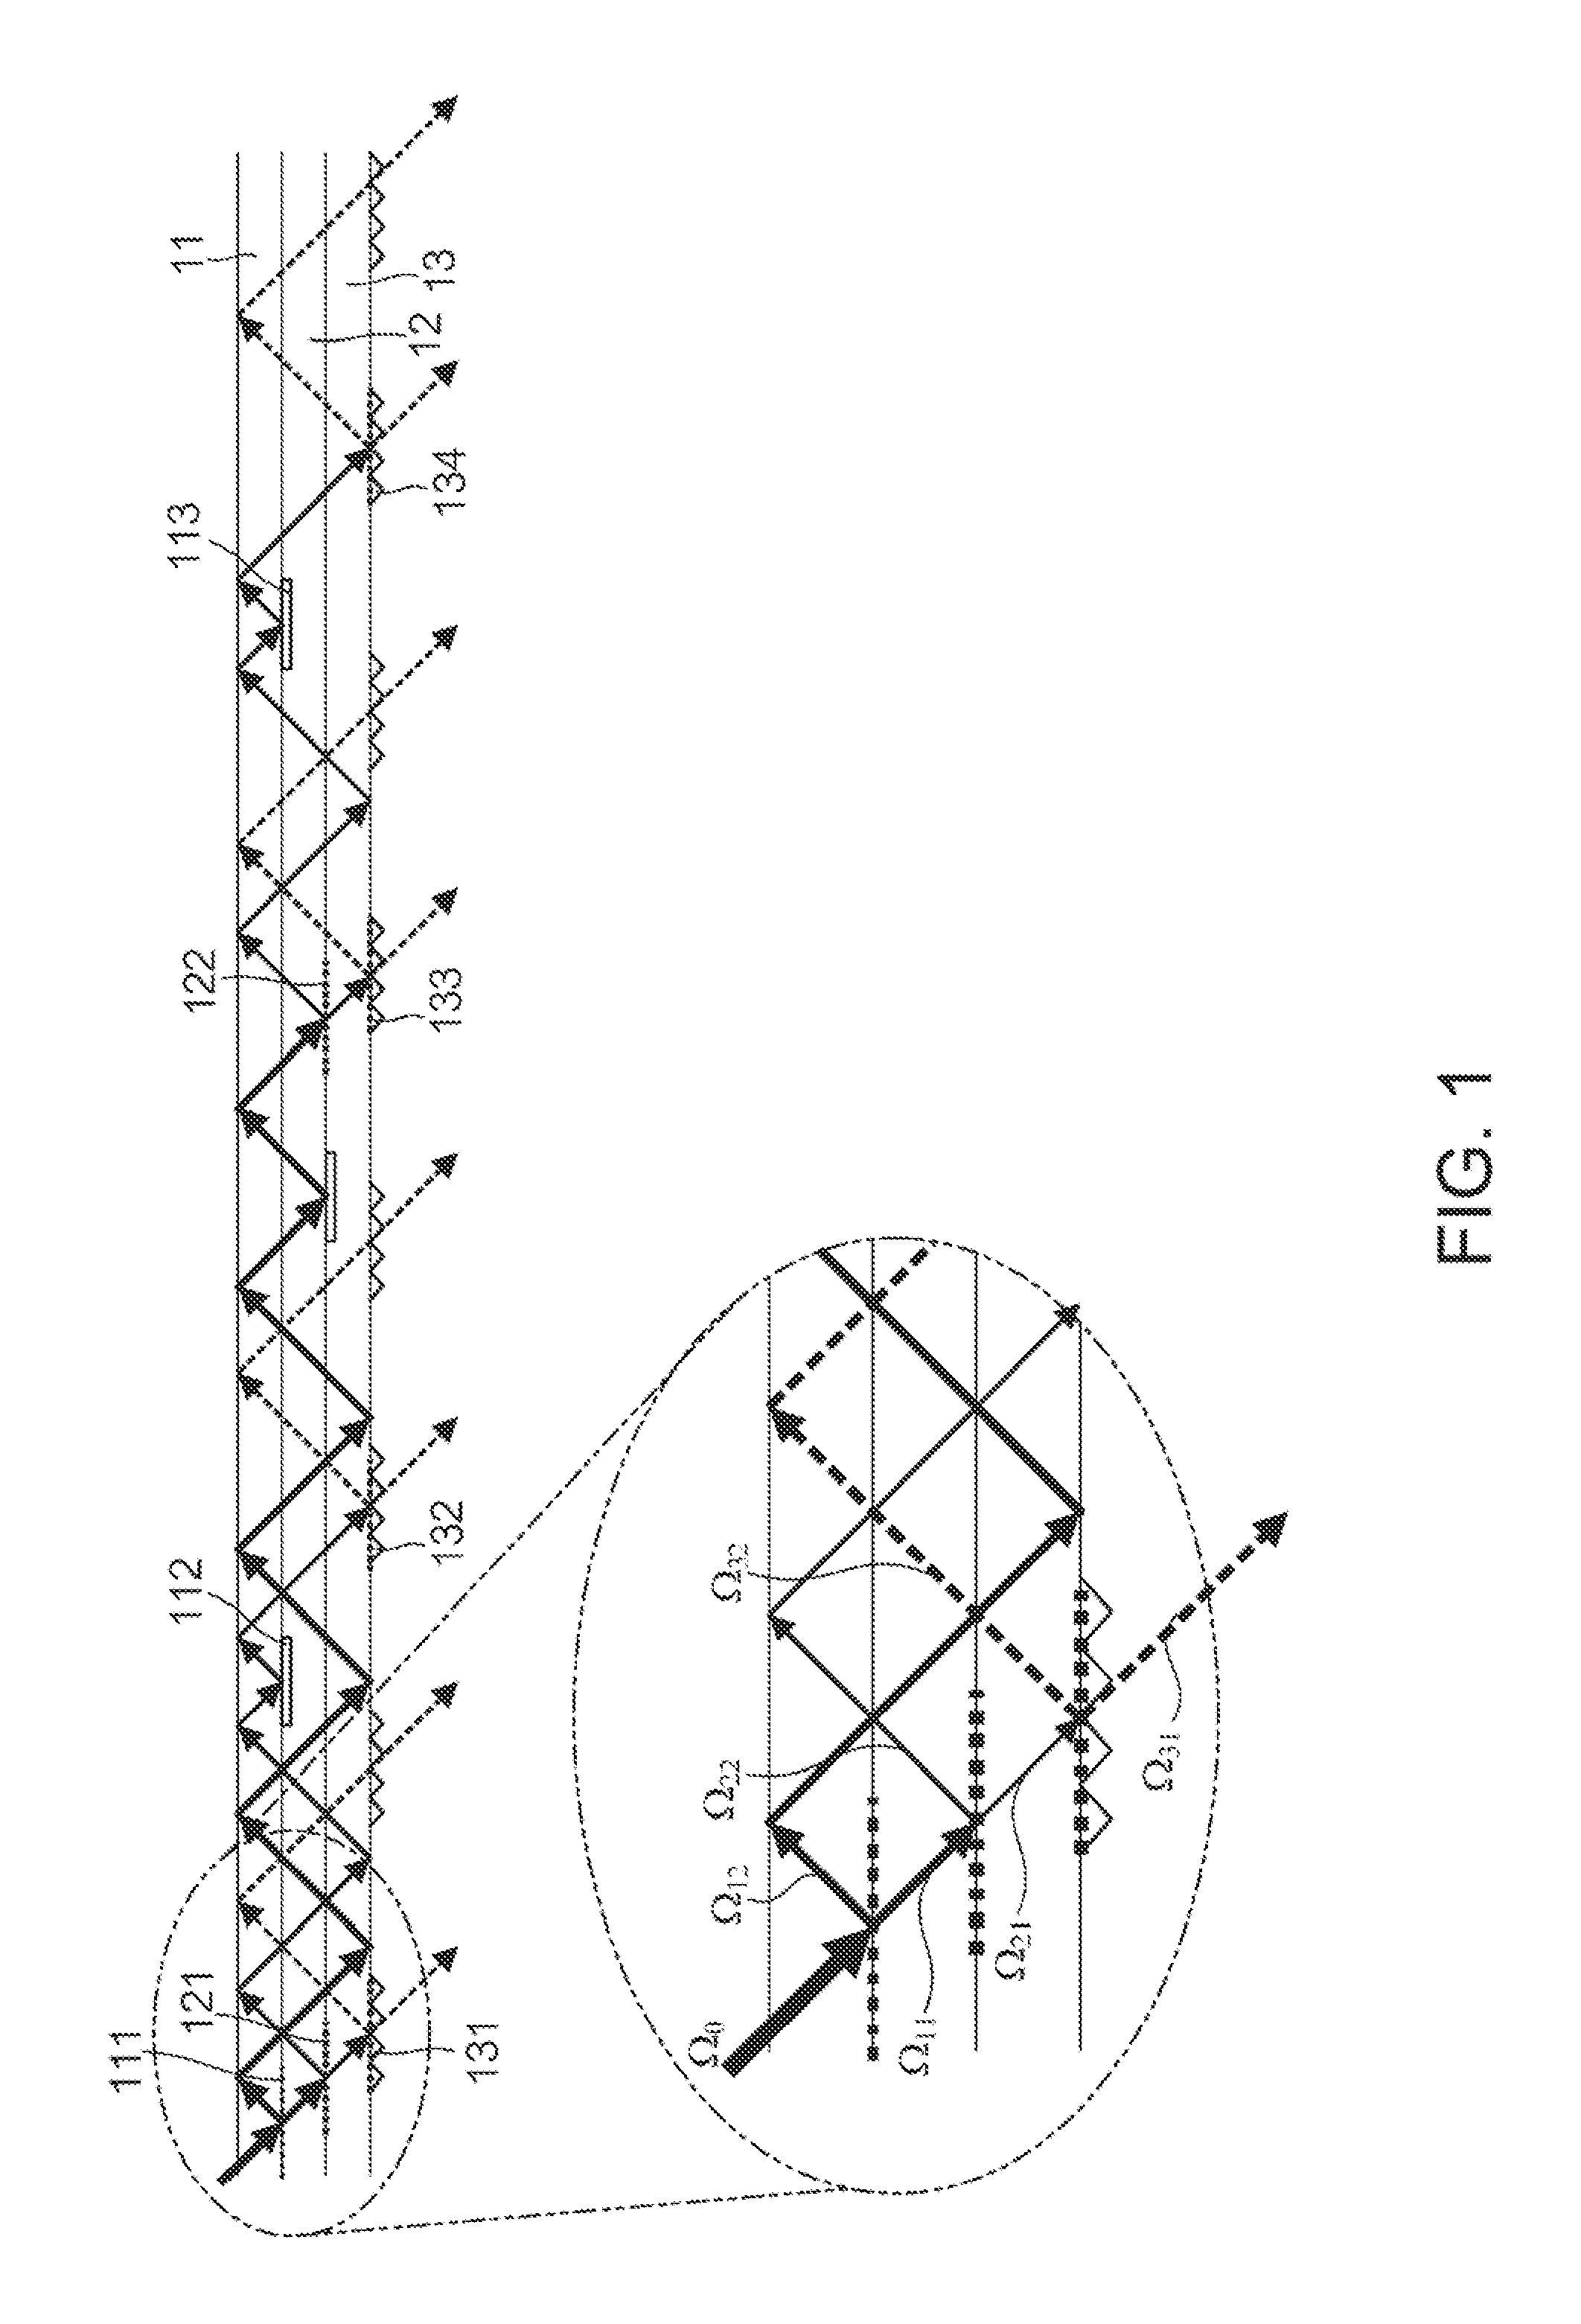 Light divider and magnetism measurement apparatus